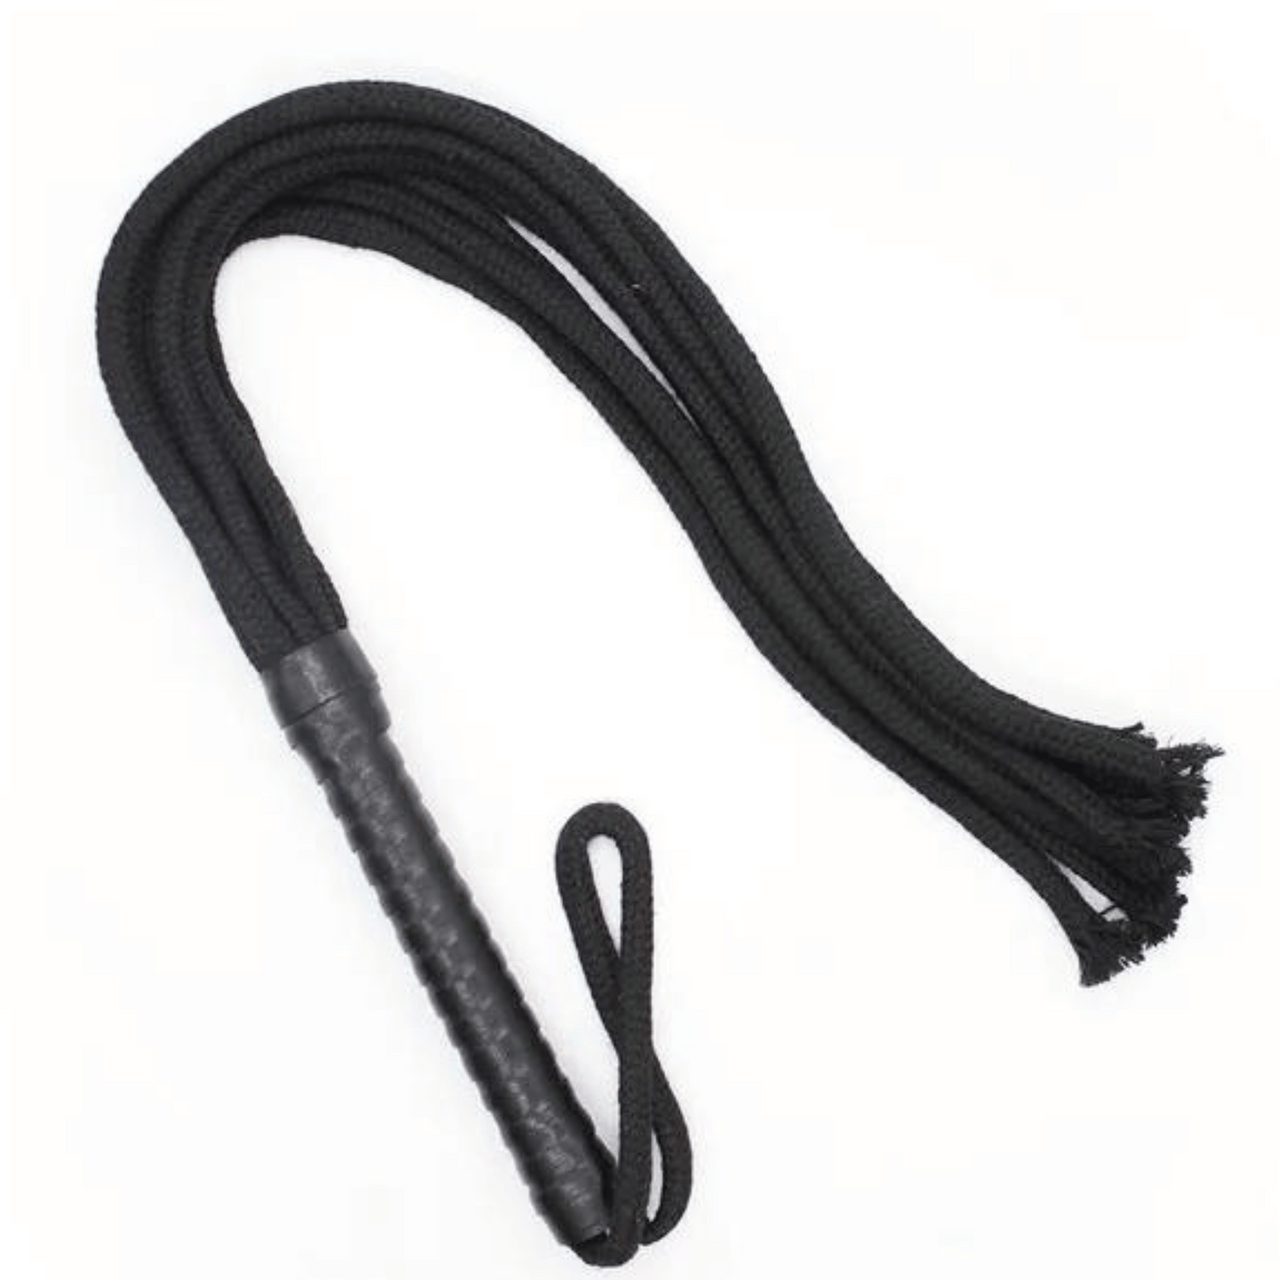 Sensory Experience Flogger Cotton Rope Flogger with PU Leather Handle for Enhanced Play